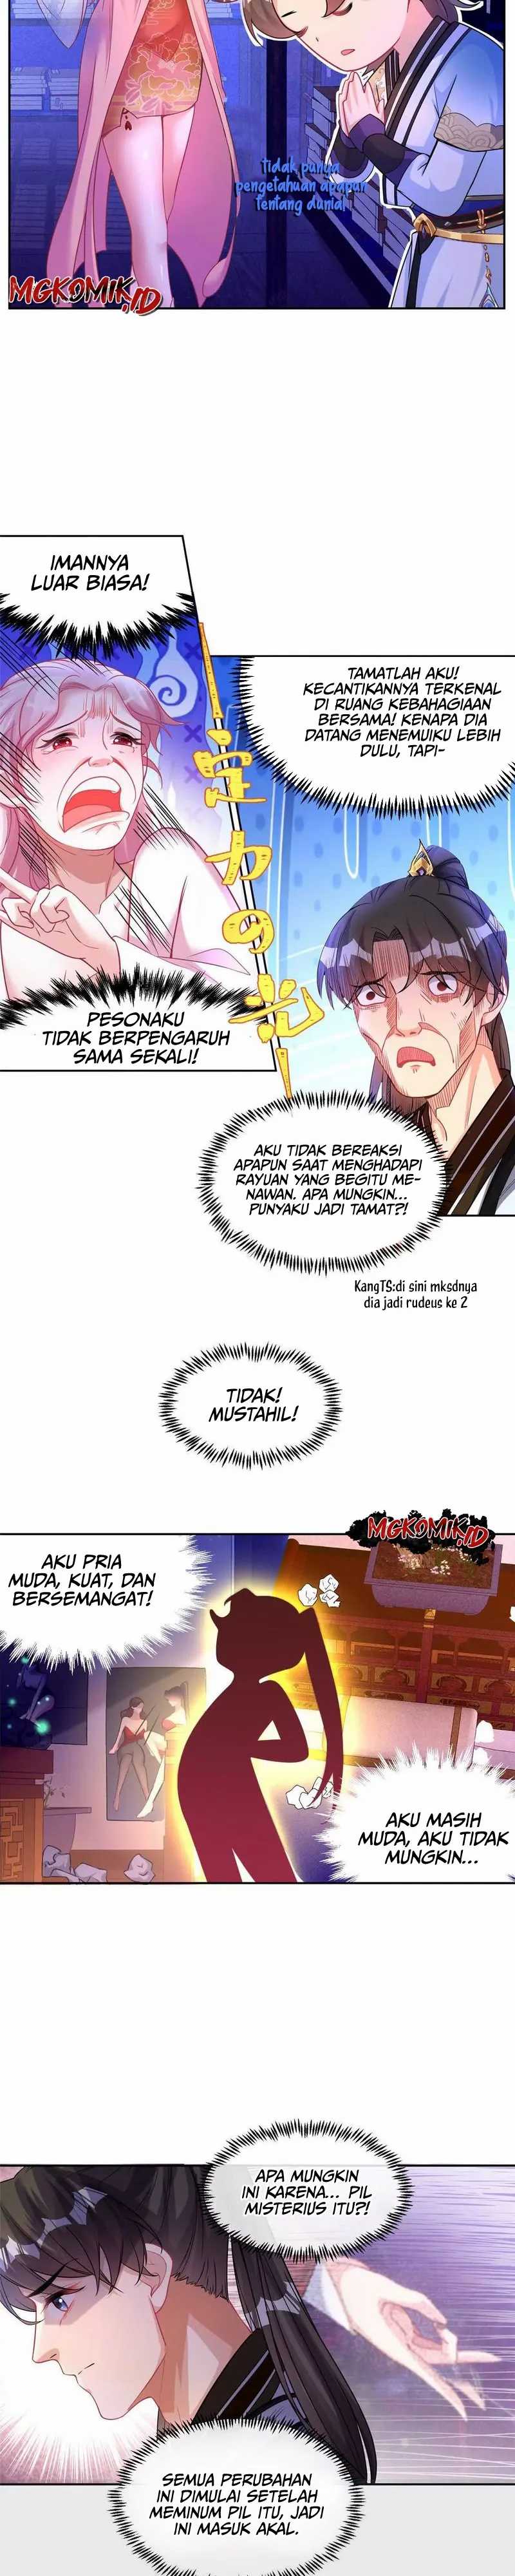 Stuck by the Demoness’s Side Chapter 03